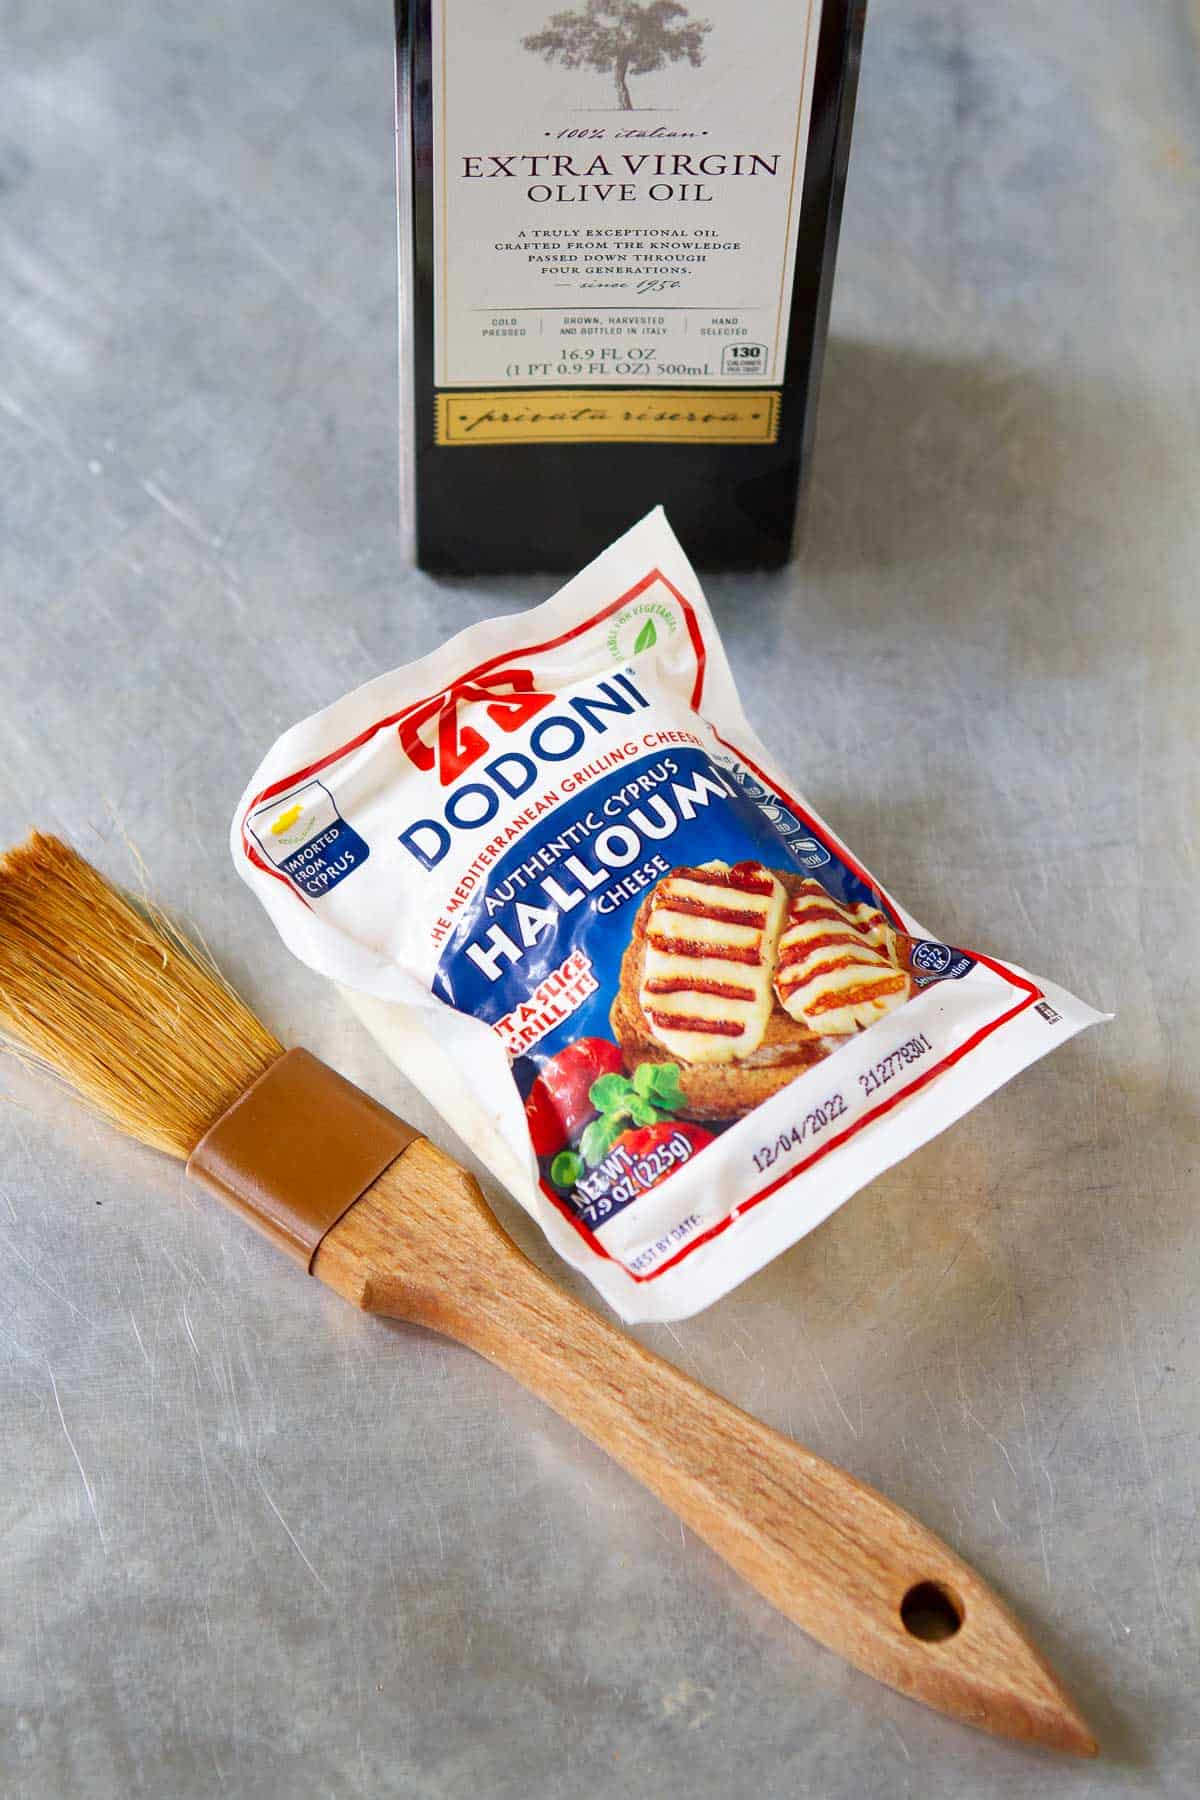 A block of halloumi, olive oil and pastry brush.